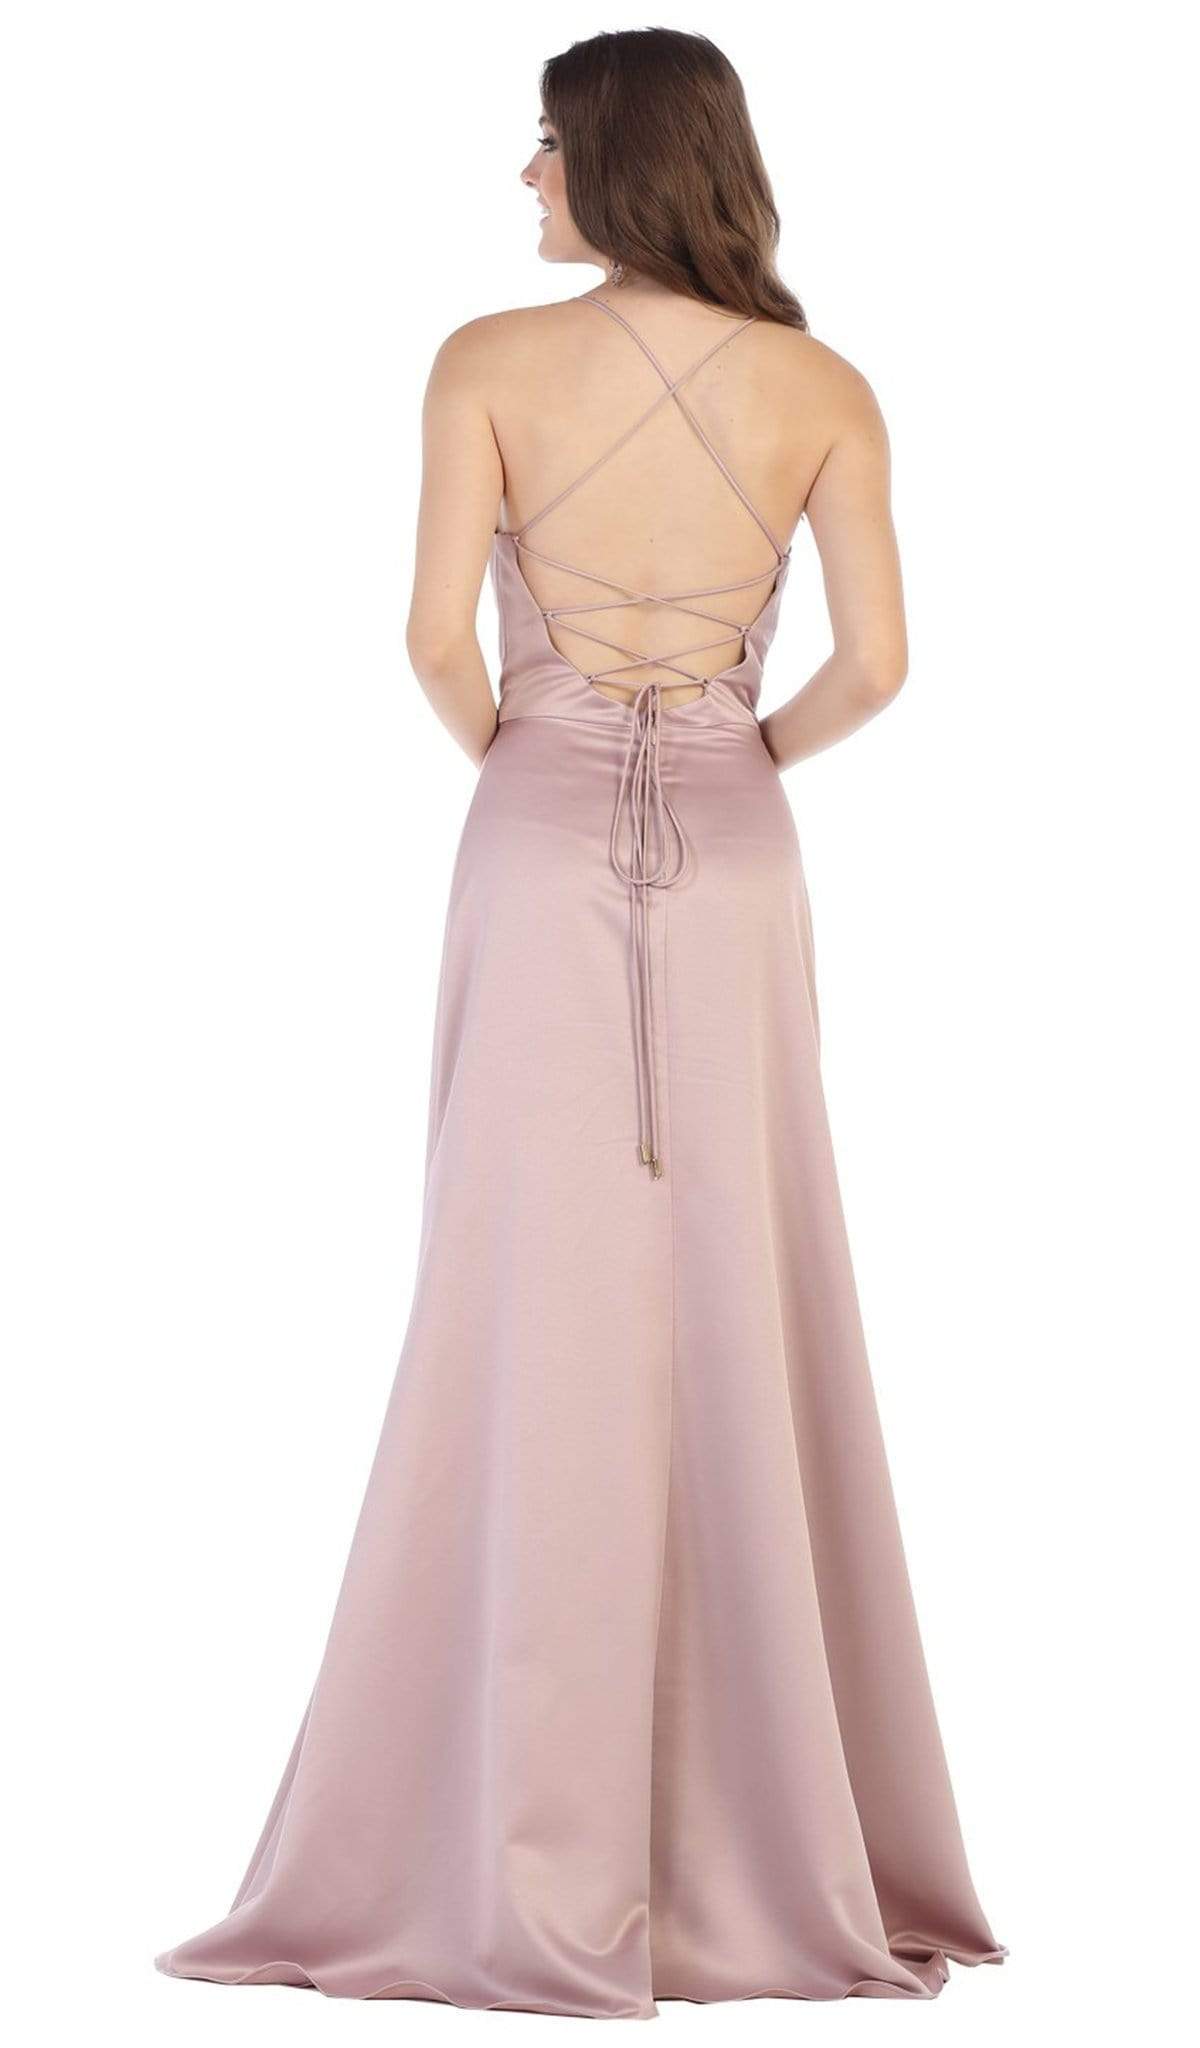 May Queen - MQ1594 Halter Neck Strappy Back Satin A-Line Gown Special Occasion Dress